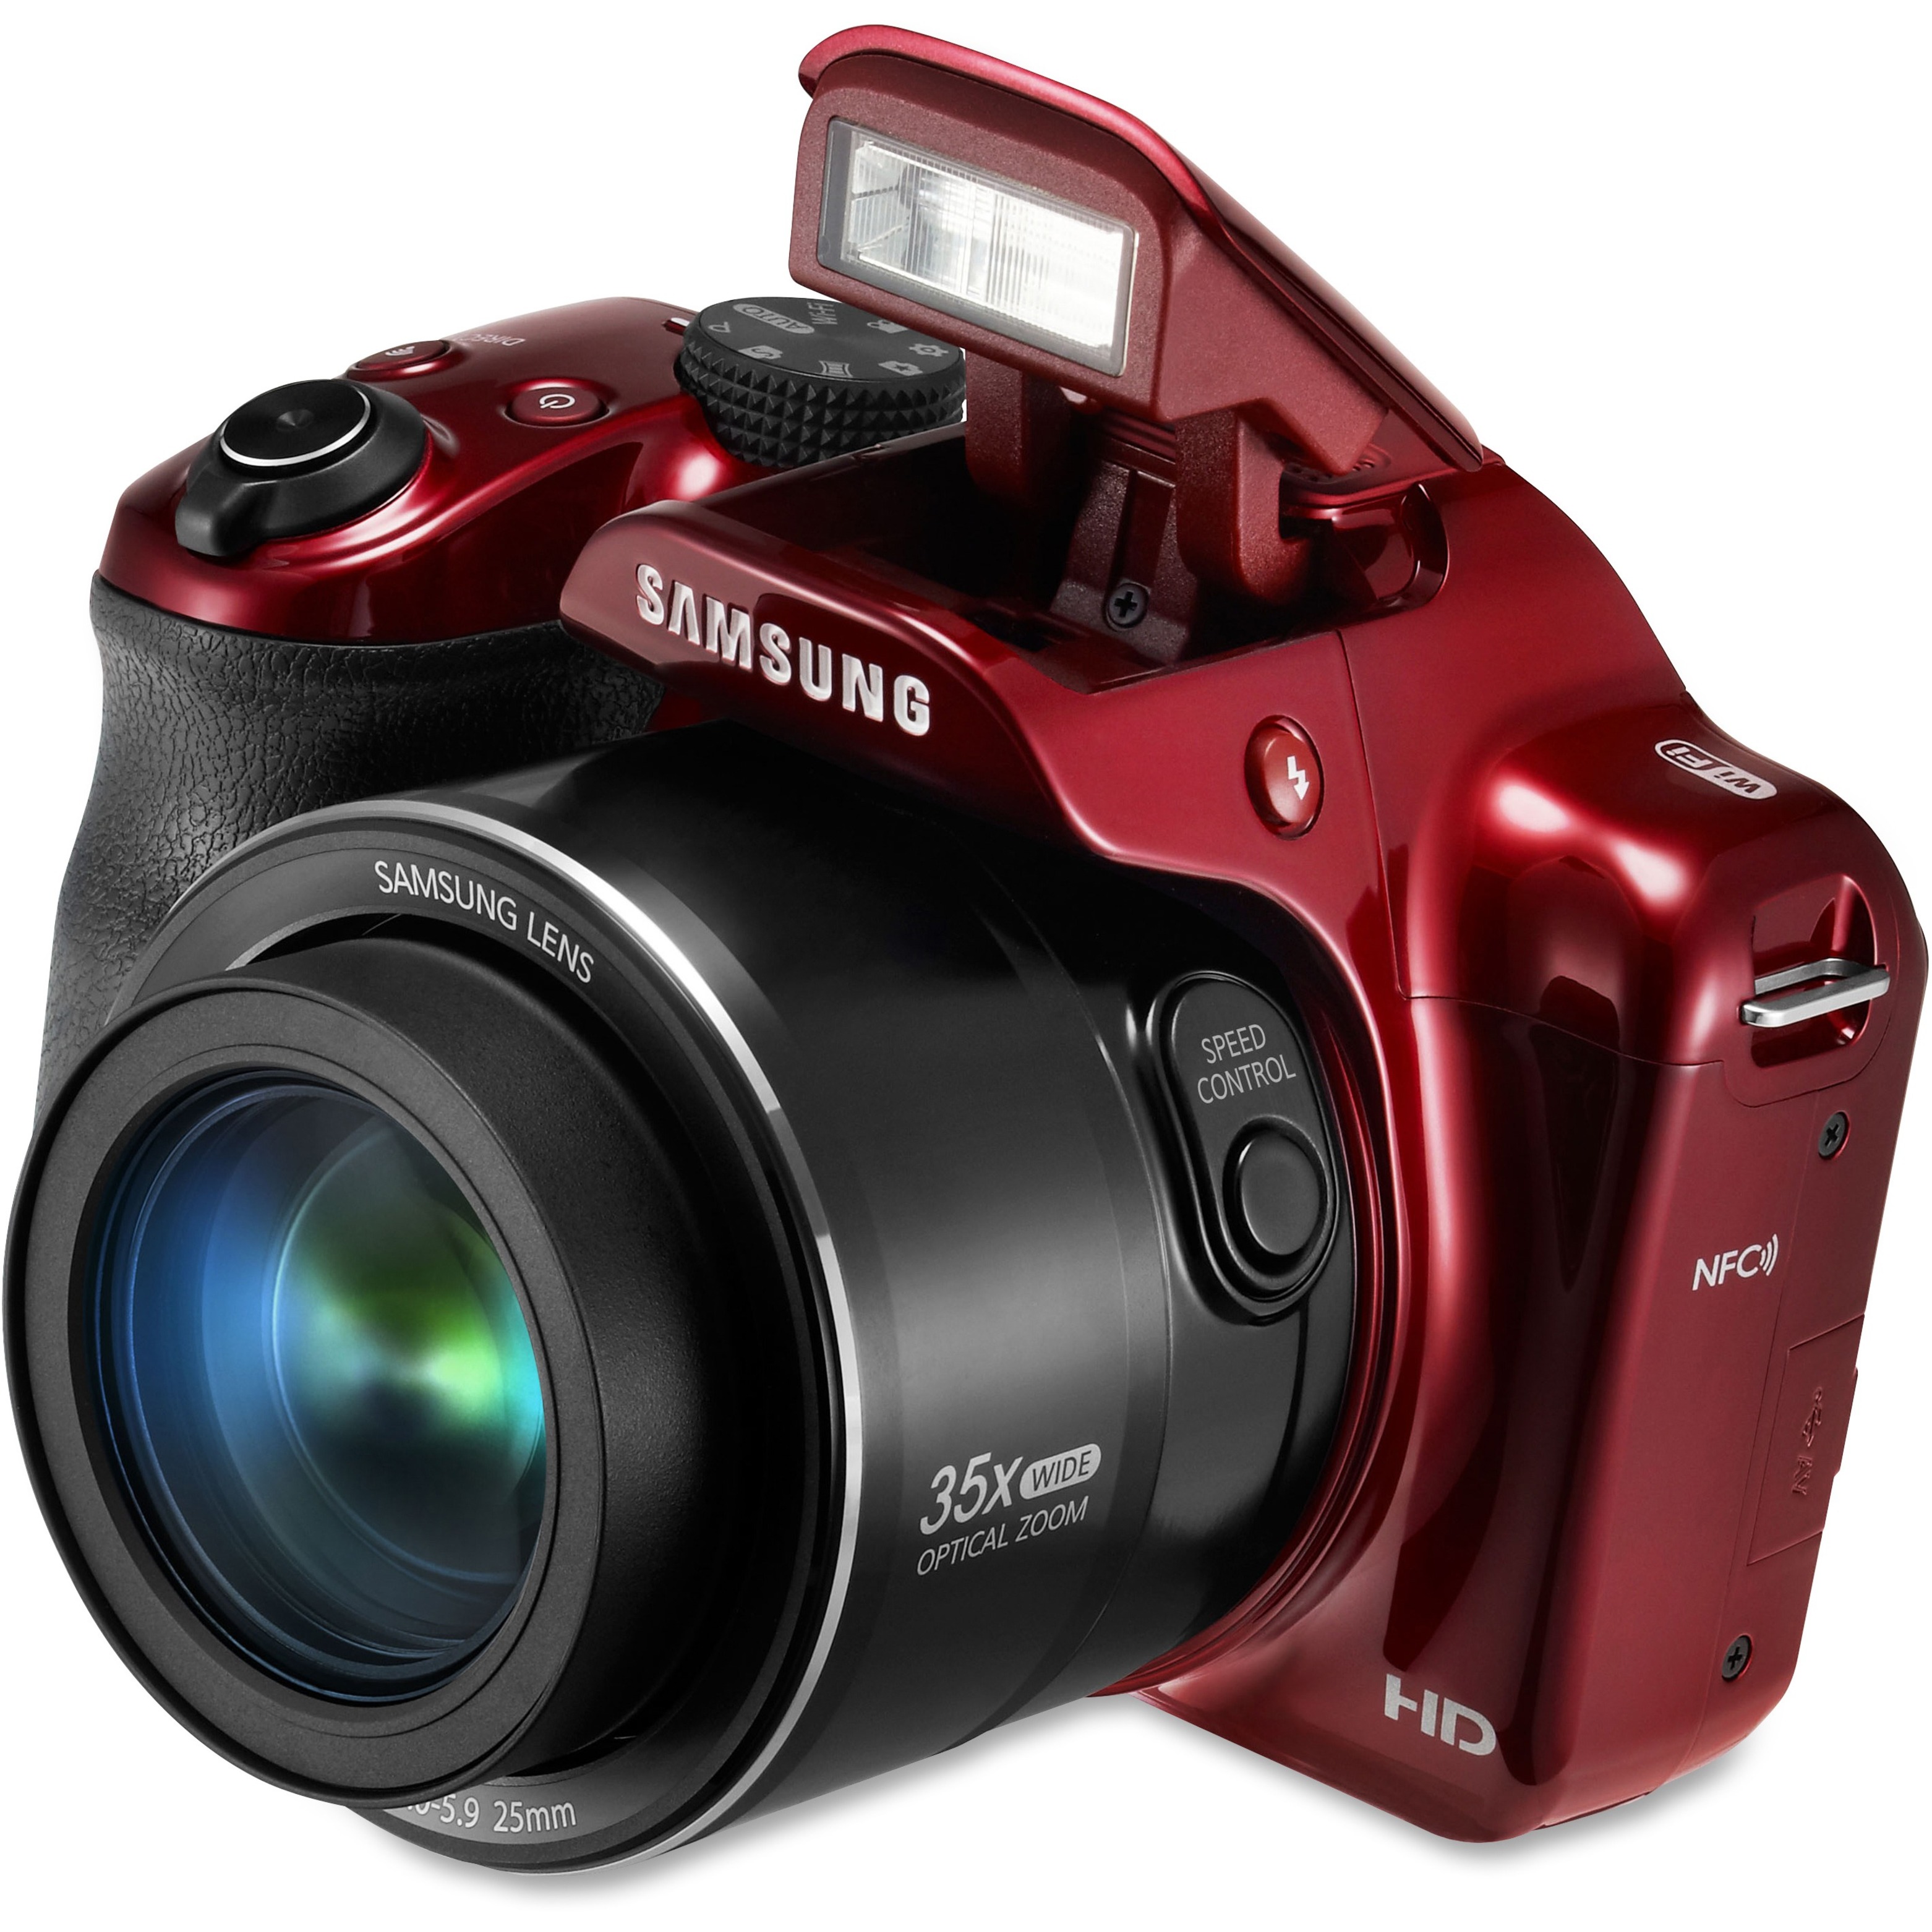 Samsung WB1100F 16.2 Megapixel Compact Camera, Red - image 3 of 5